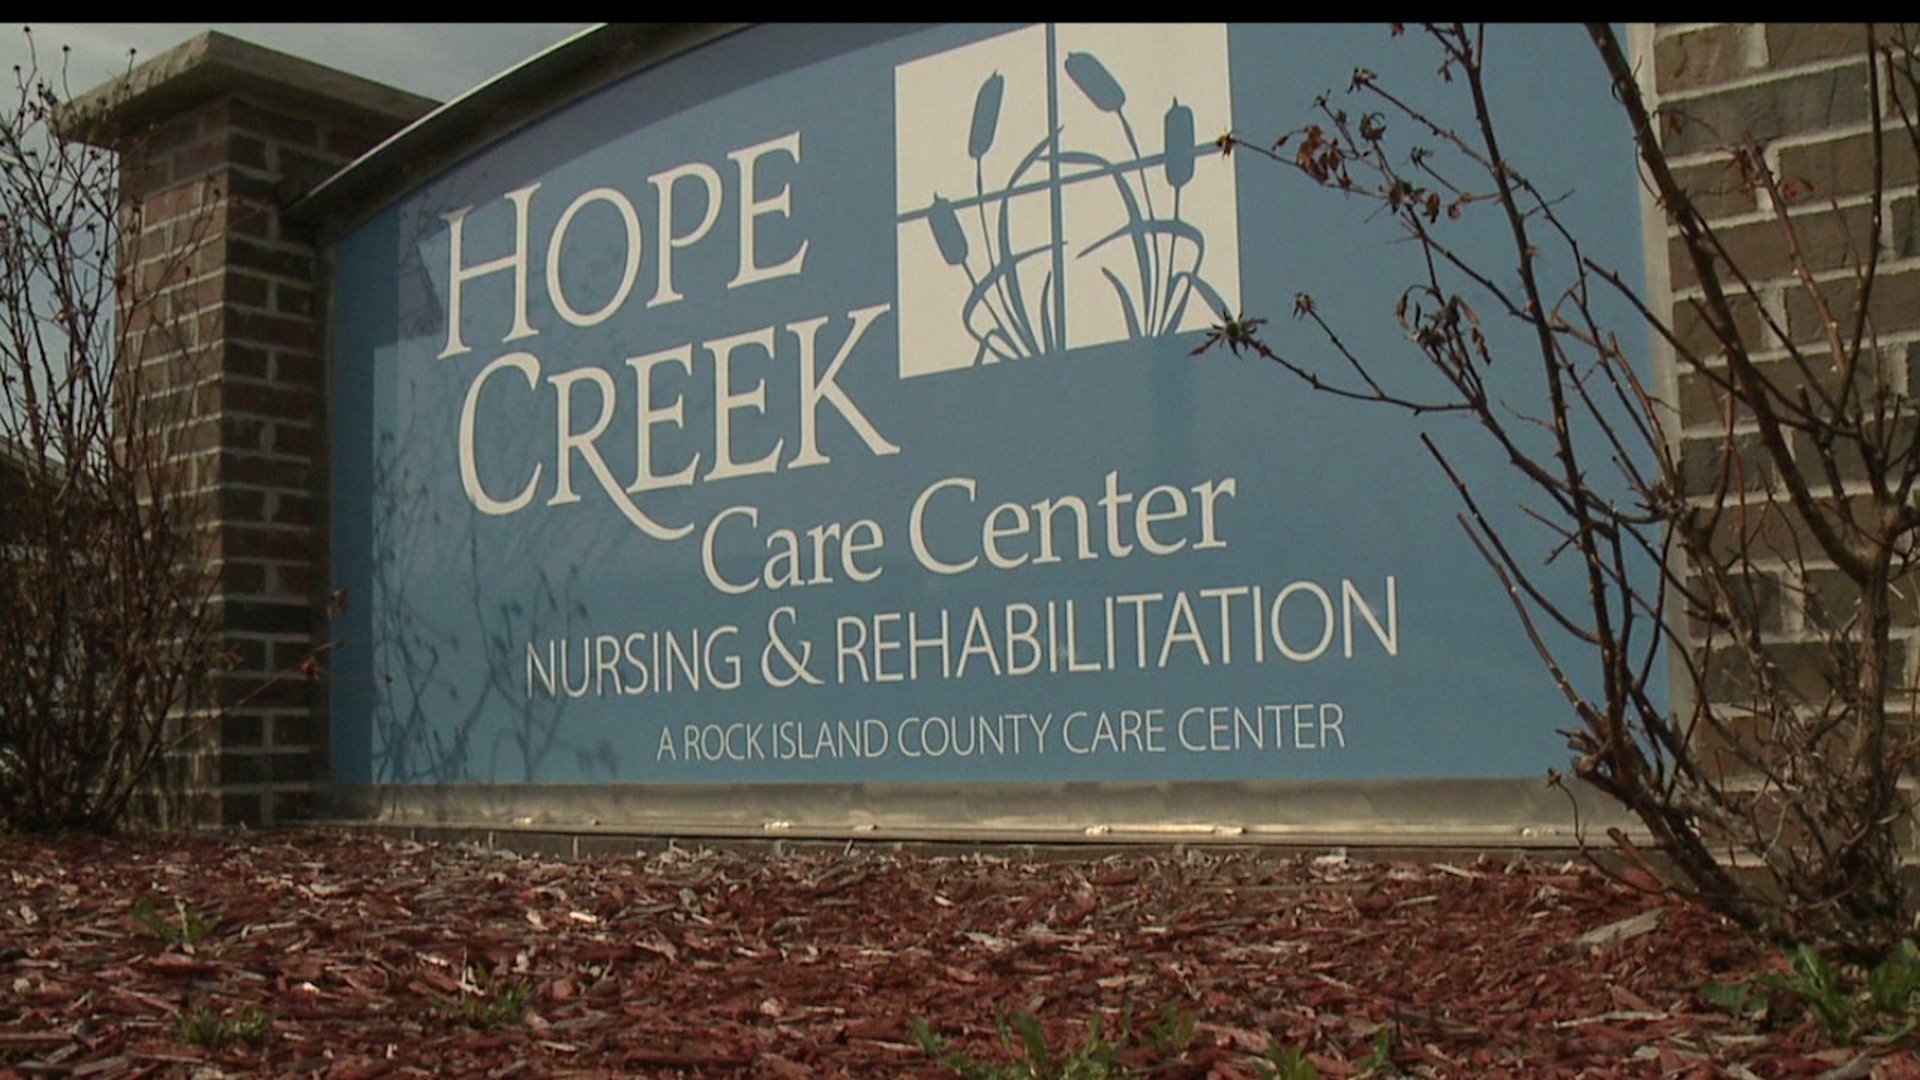 Staff concerned as County Board works to sell Hope Creek Care Center